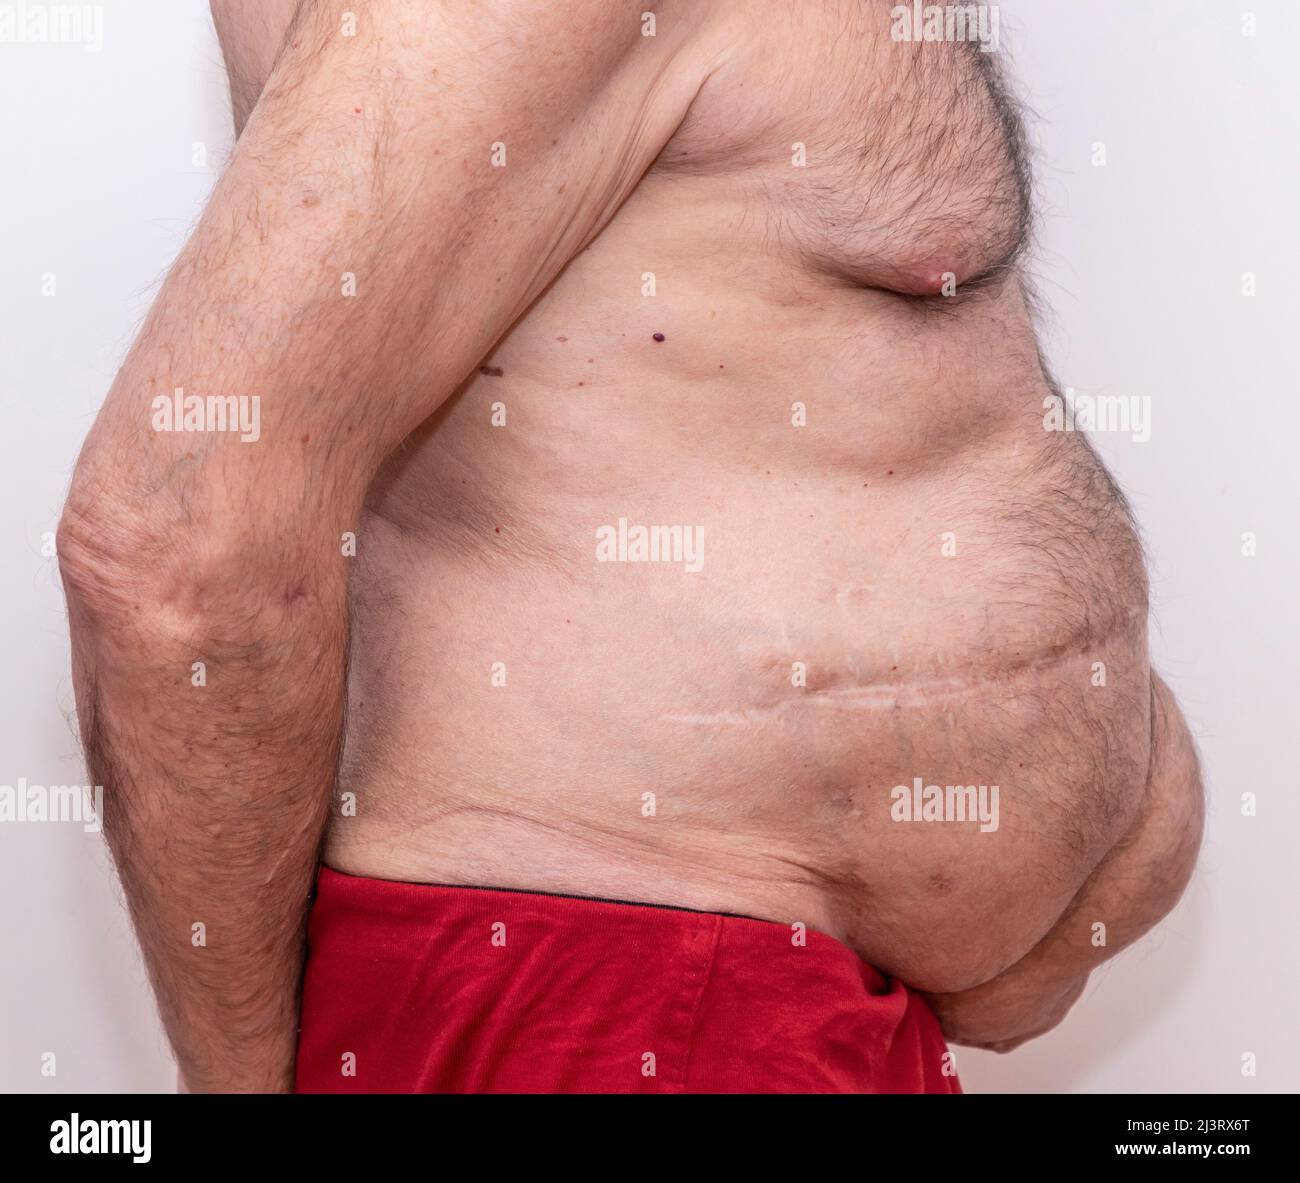 Side view of multiply abdominal incisional hernias Stock Photo